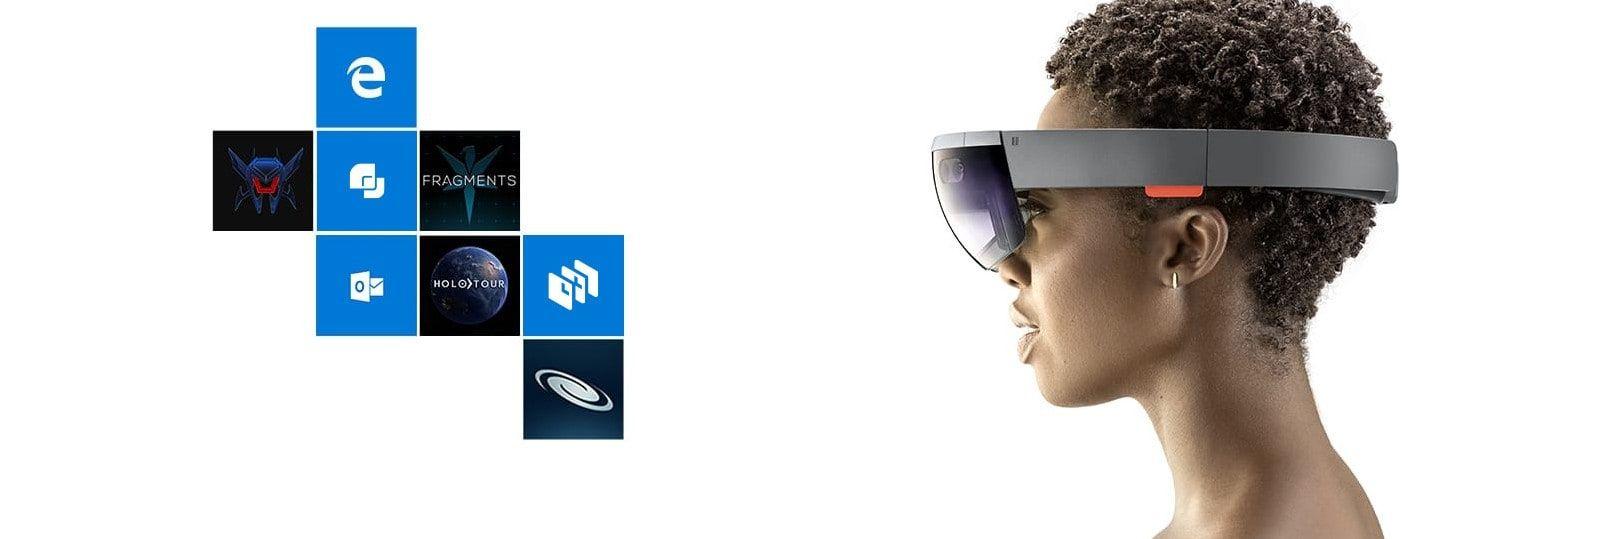 Hololens Logo - Microsoft HoloLens. The leader in mixed reality technology